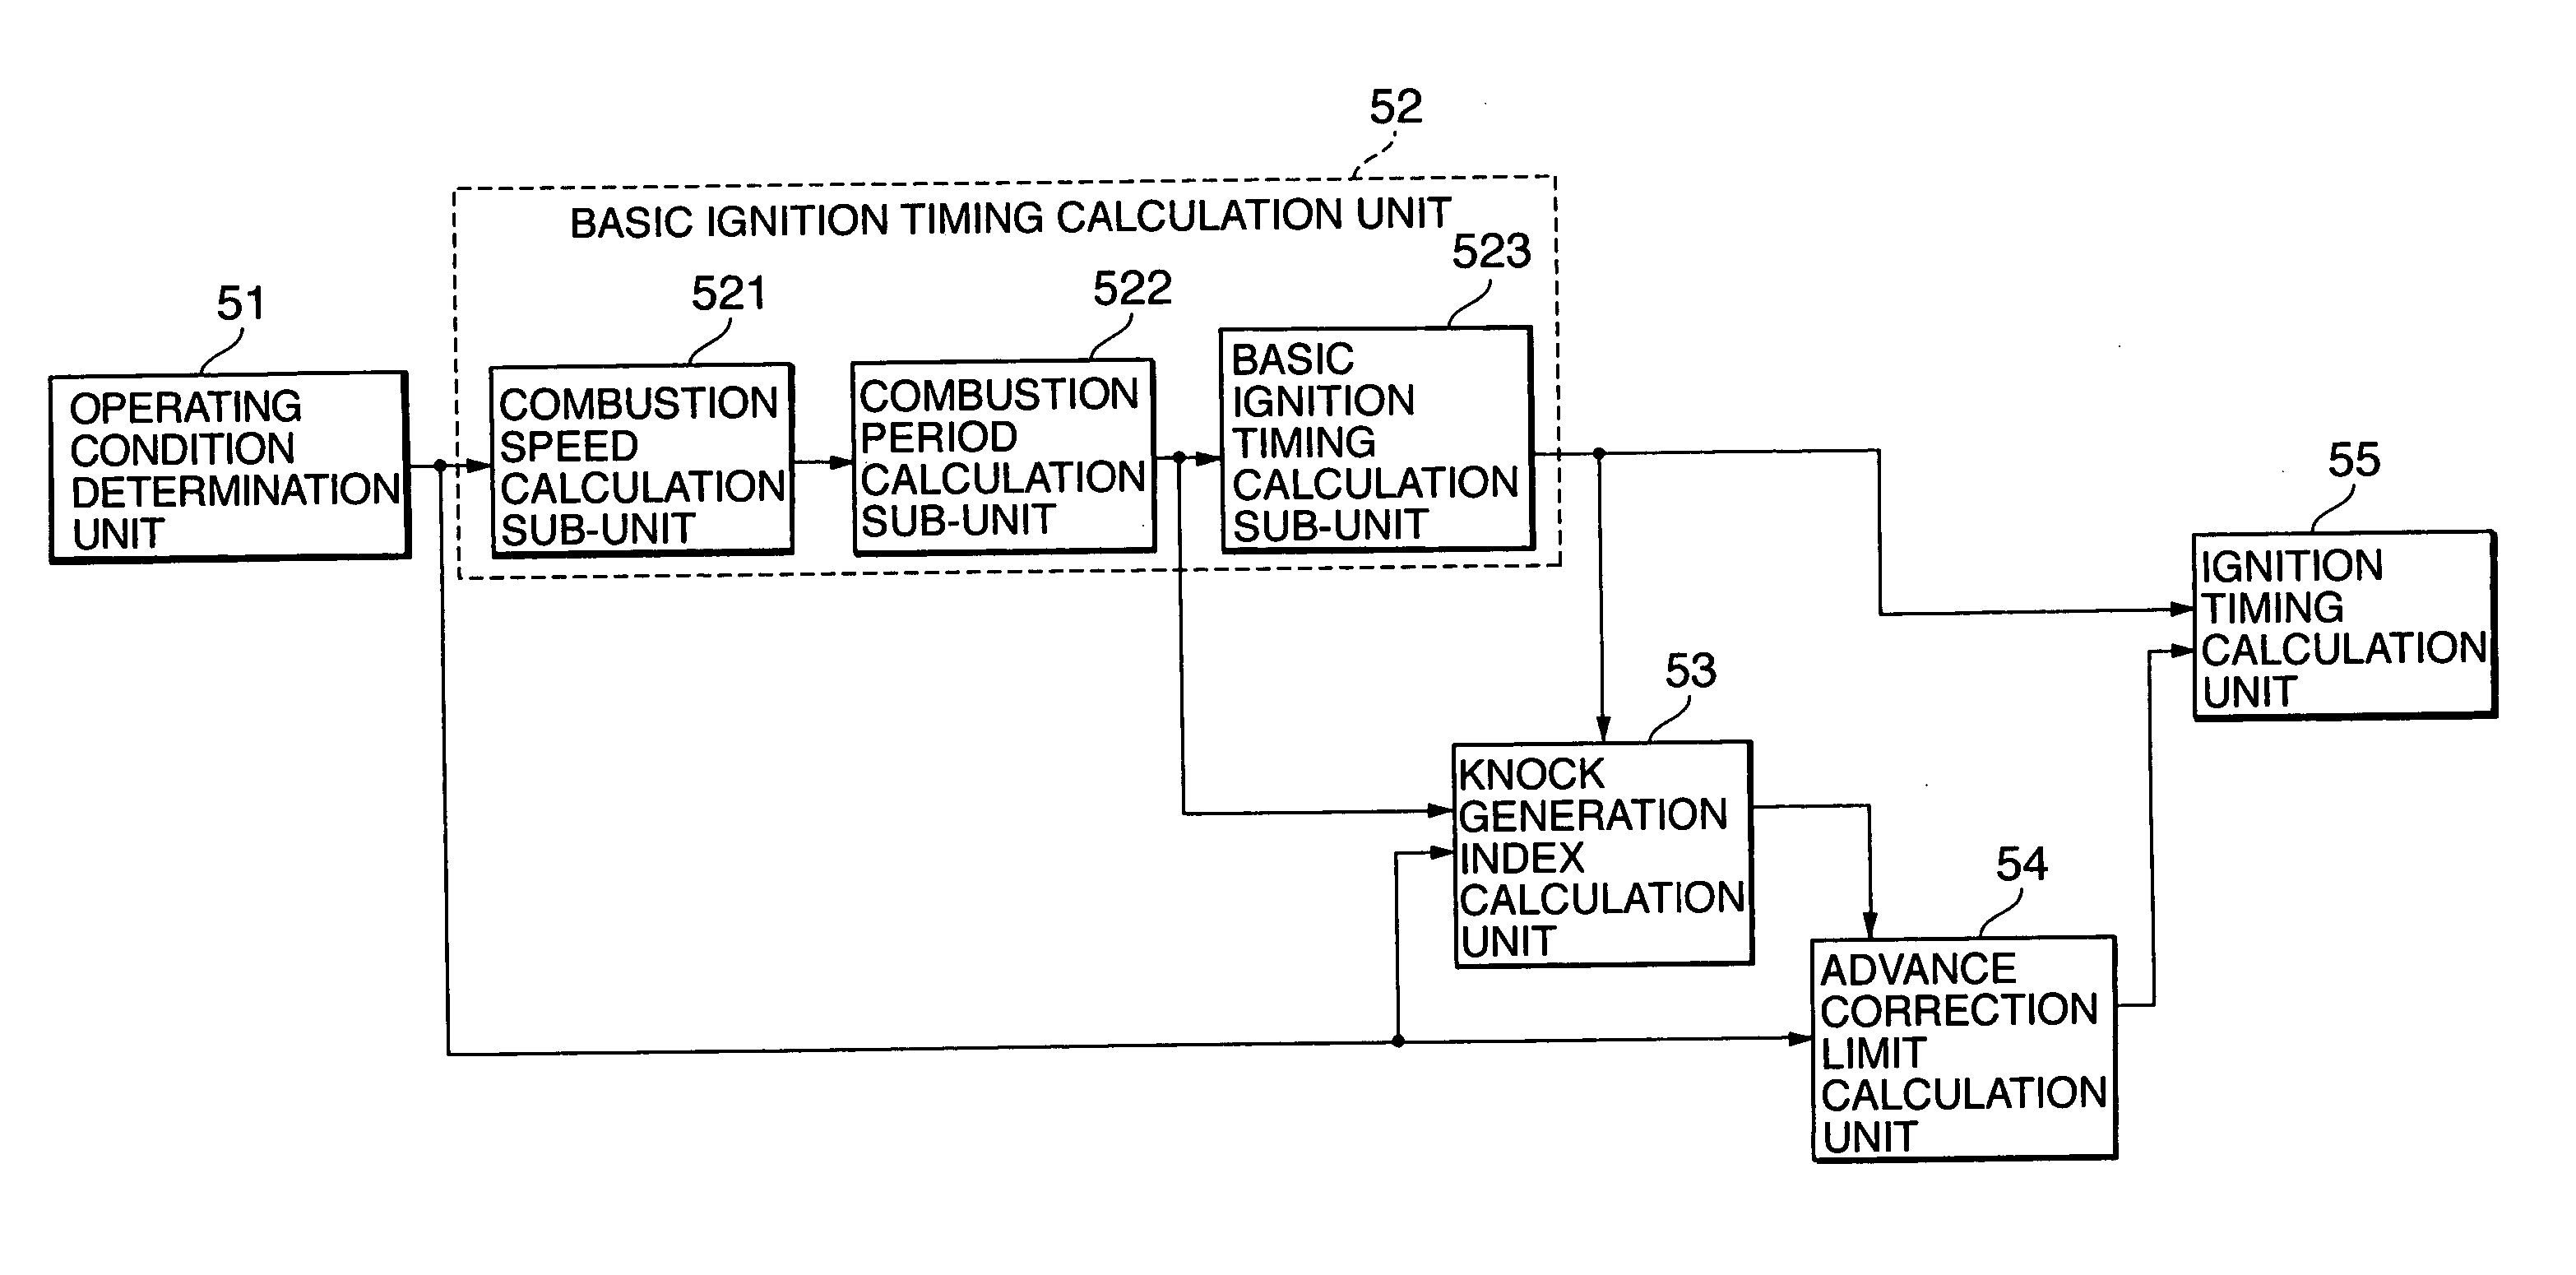 Ignition timing control for internal combustion engine